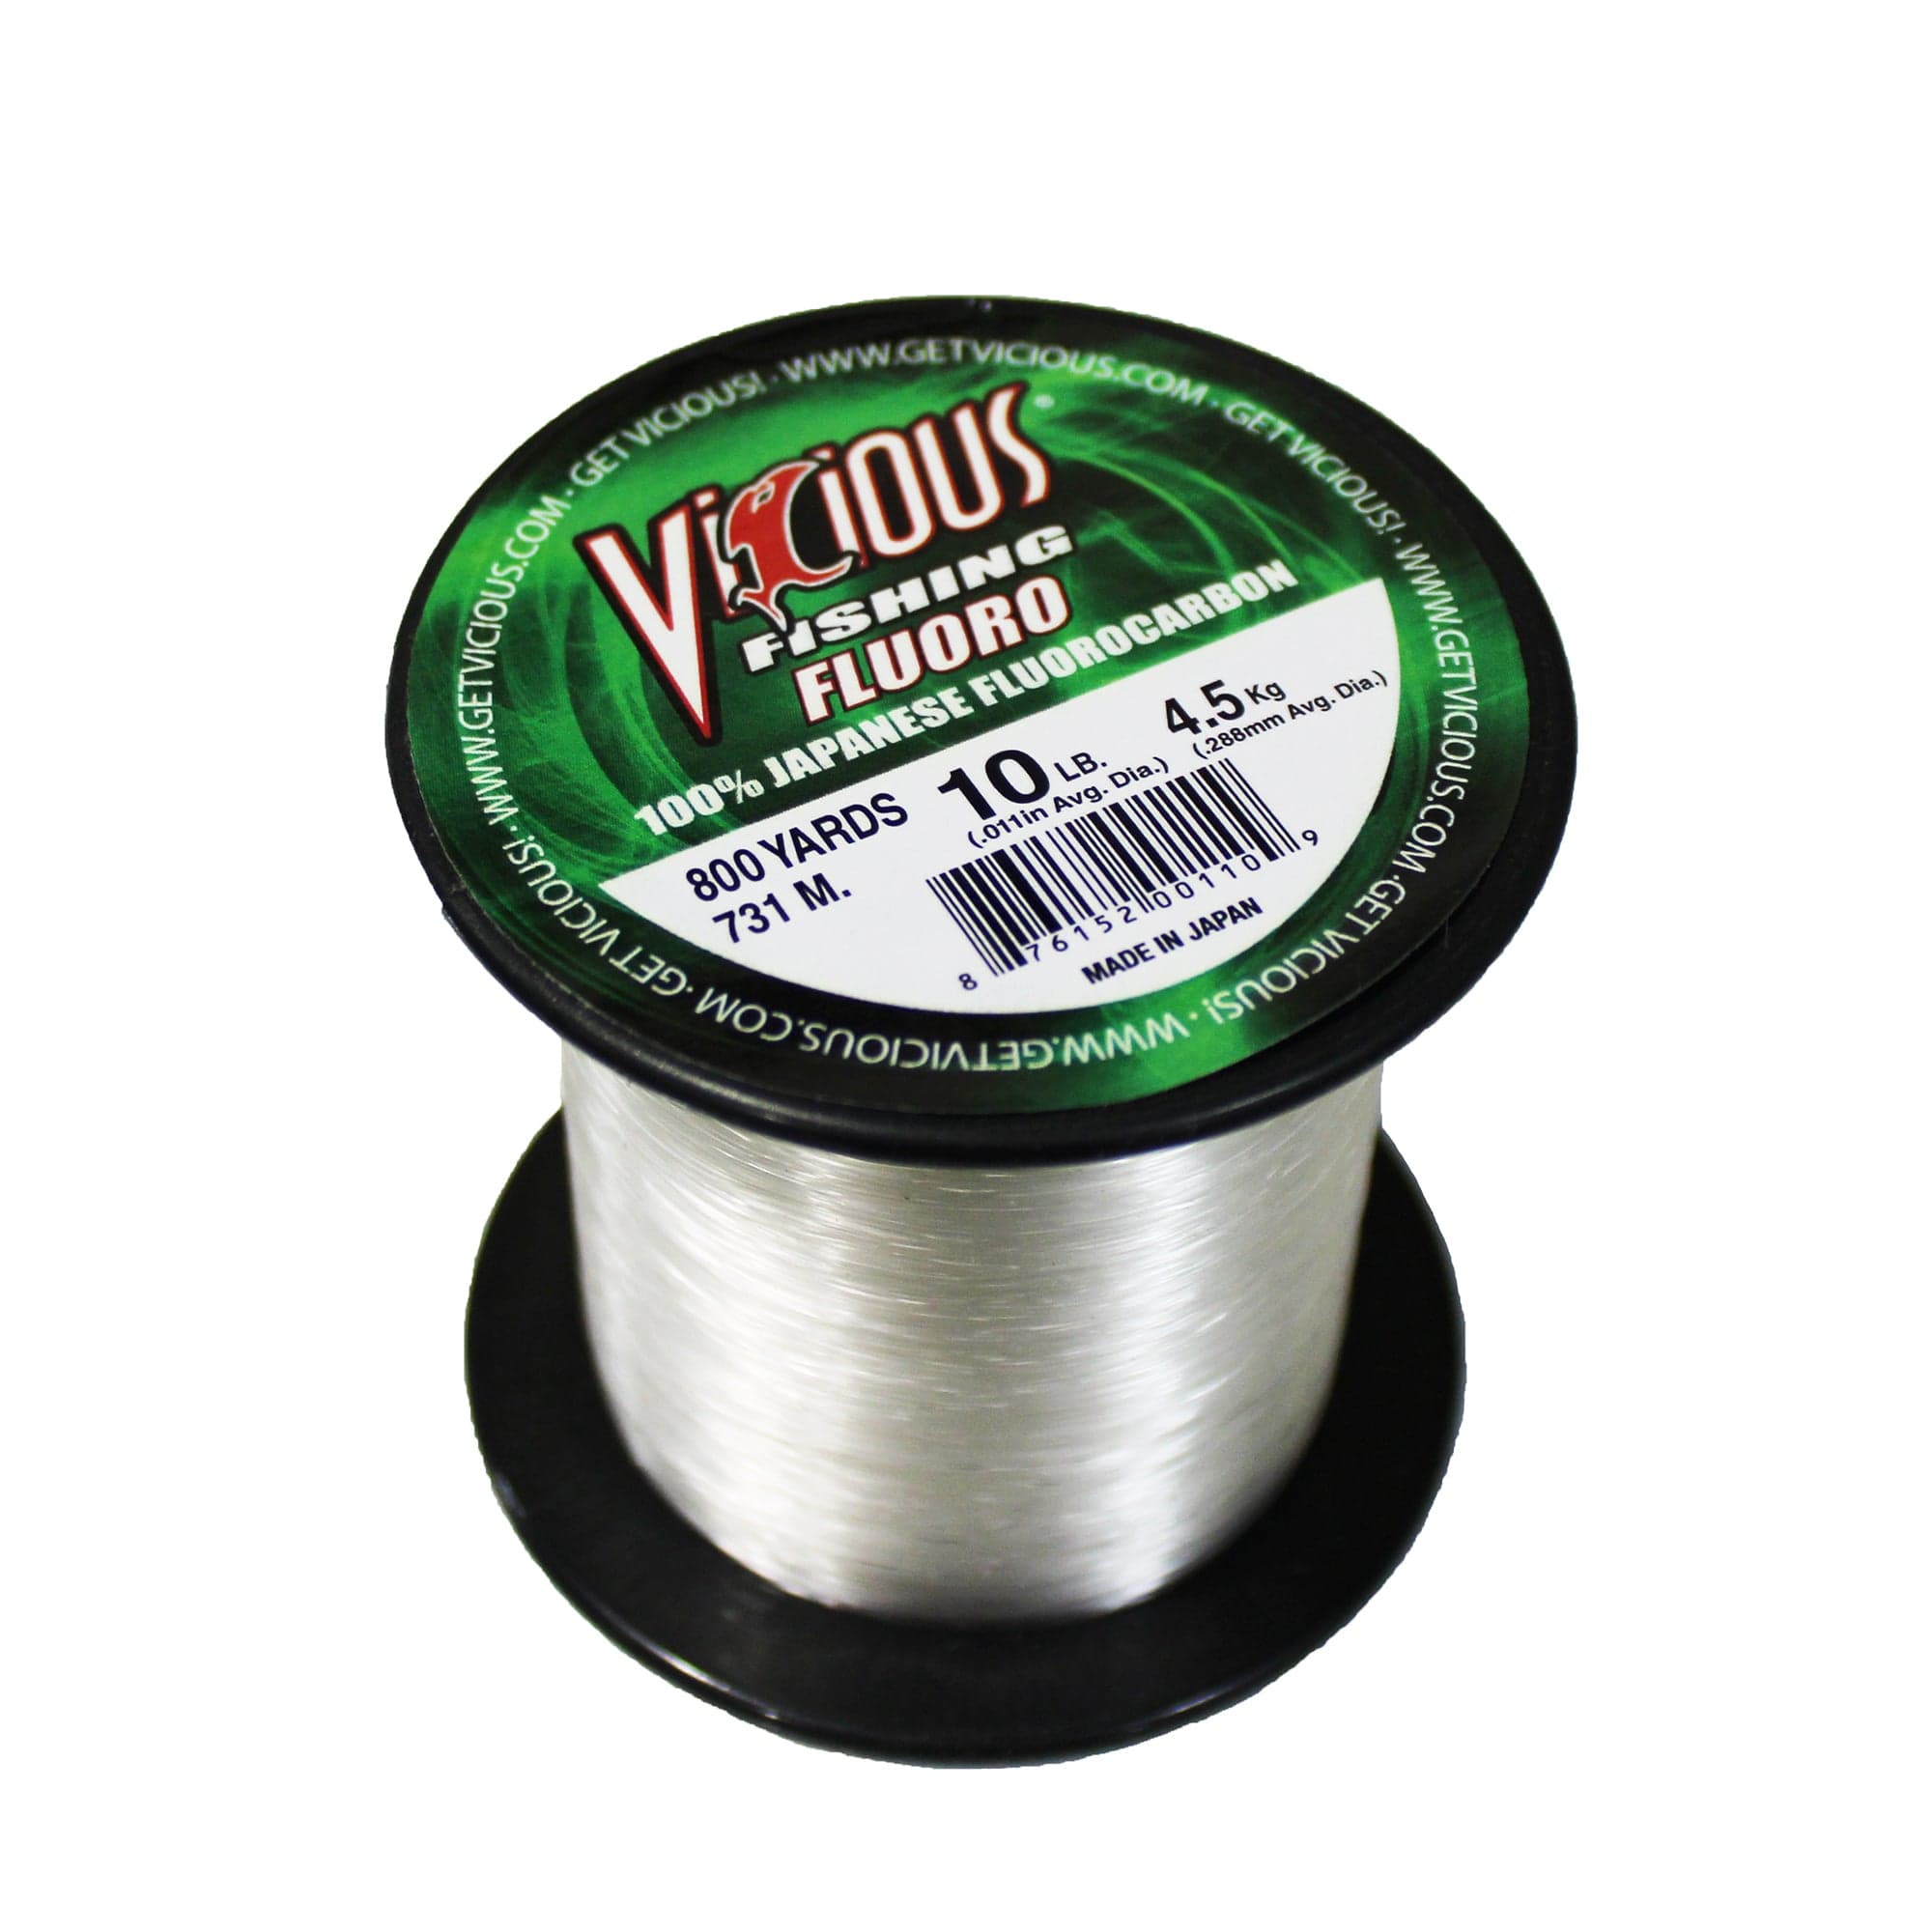 Vicious Fishing FLO Fluoro 100% Fluorocarbon Fishing Line, Clear